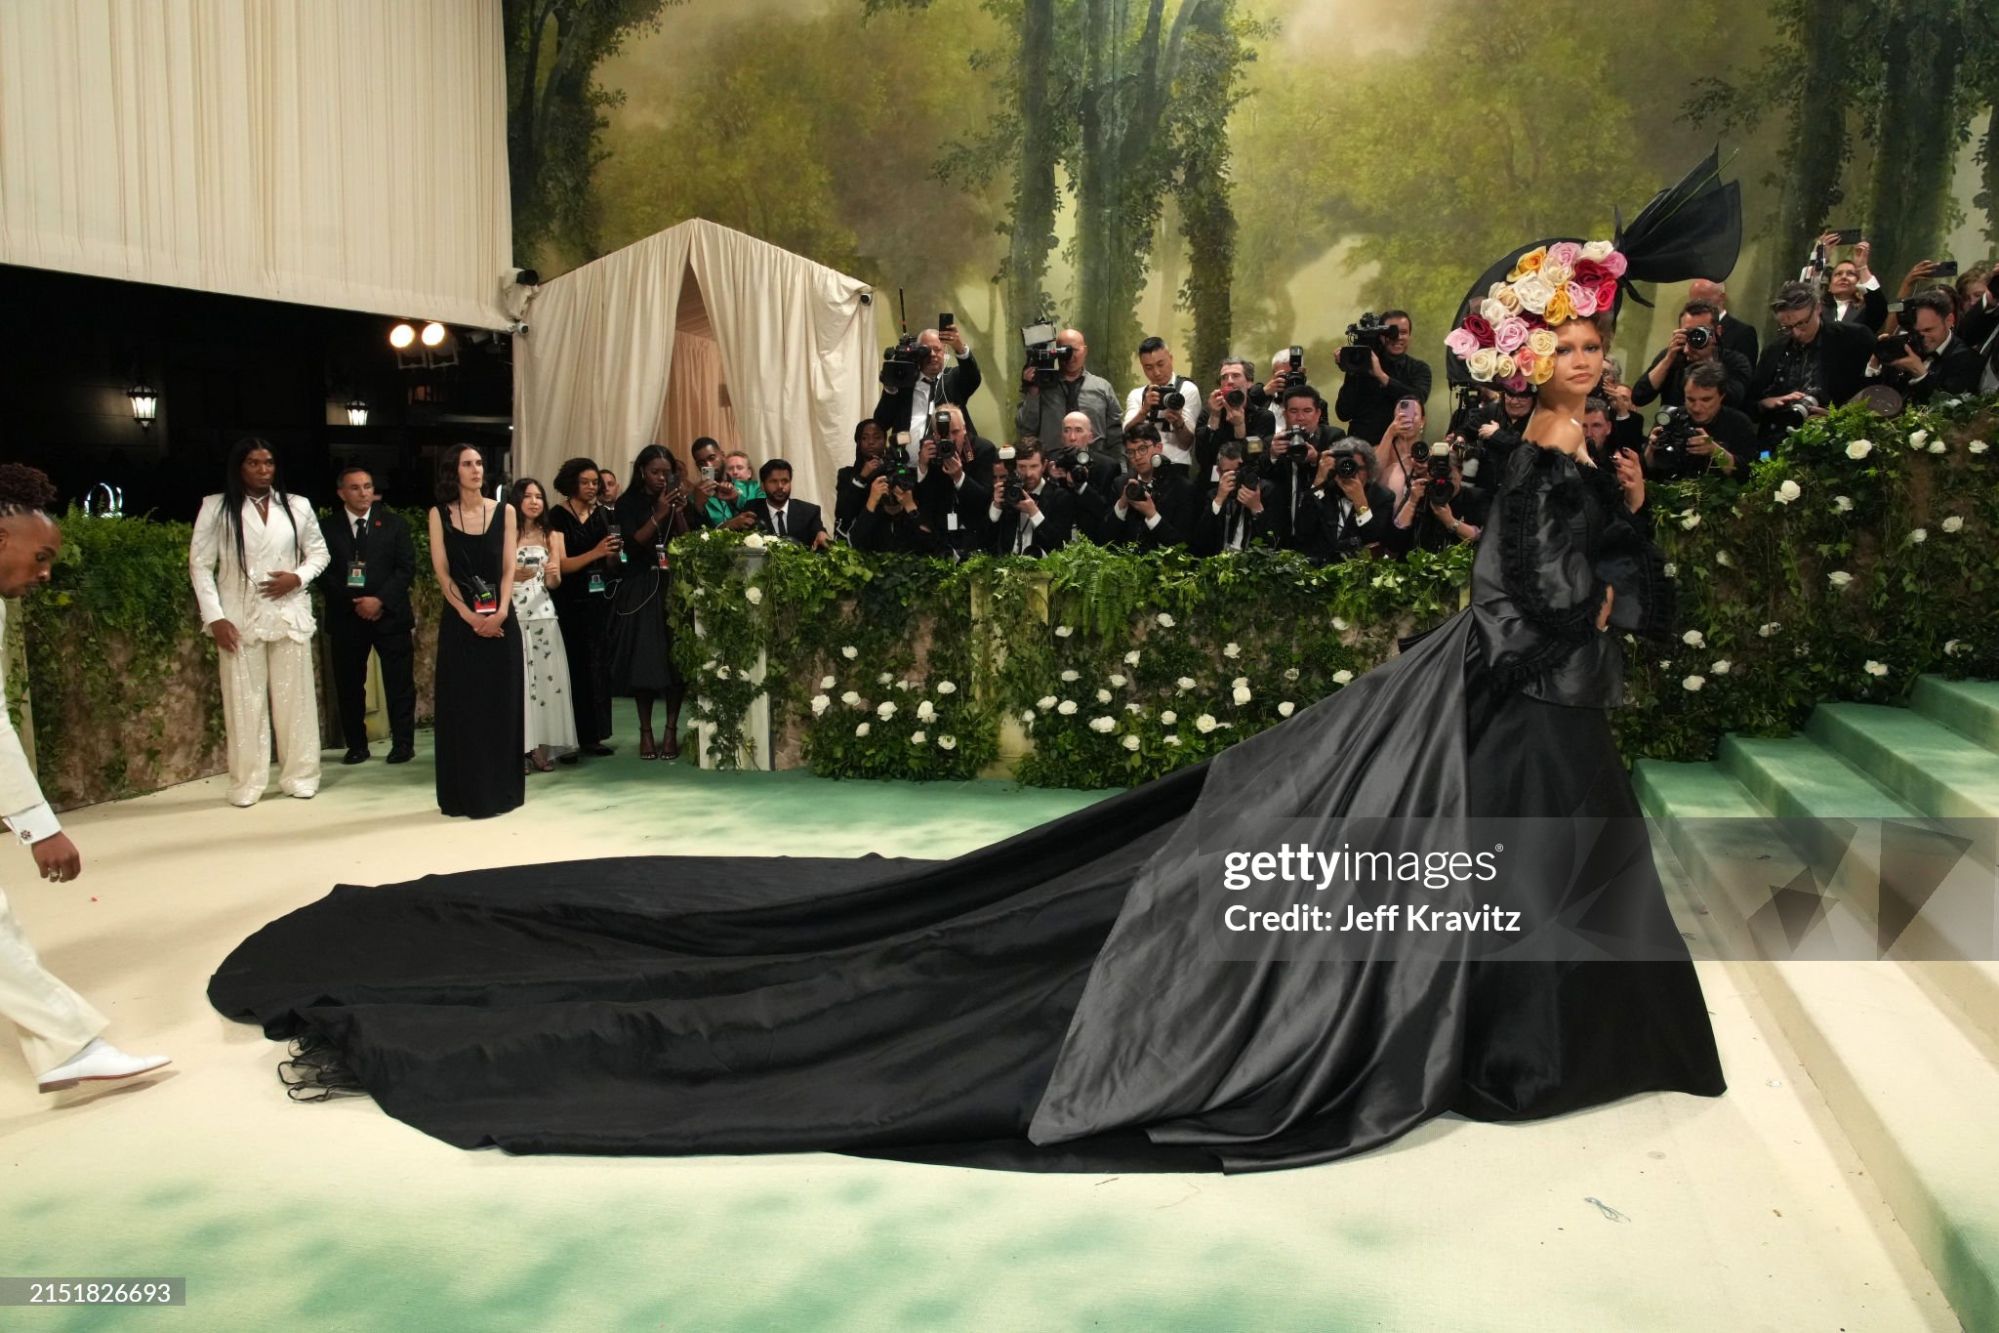 gettyimages-2151826693-2048x2048.jpg